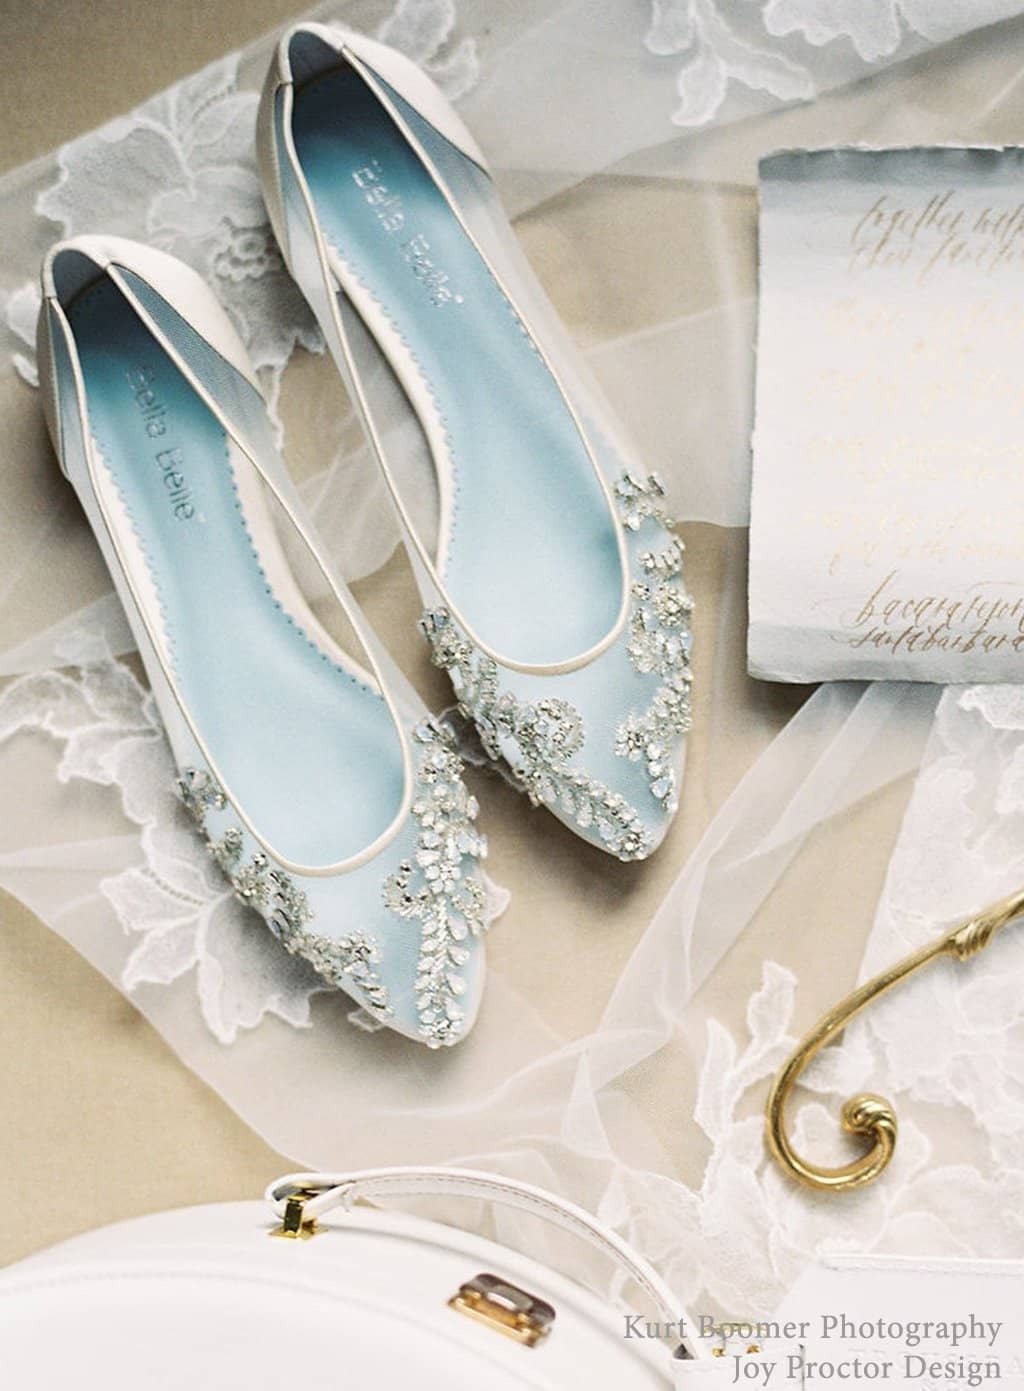 Willow Vintage Inspired Bridal Flats in Ivory